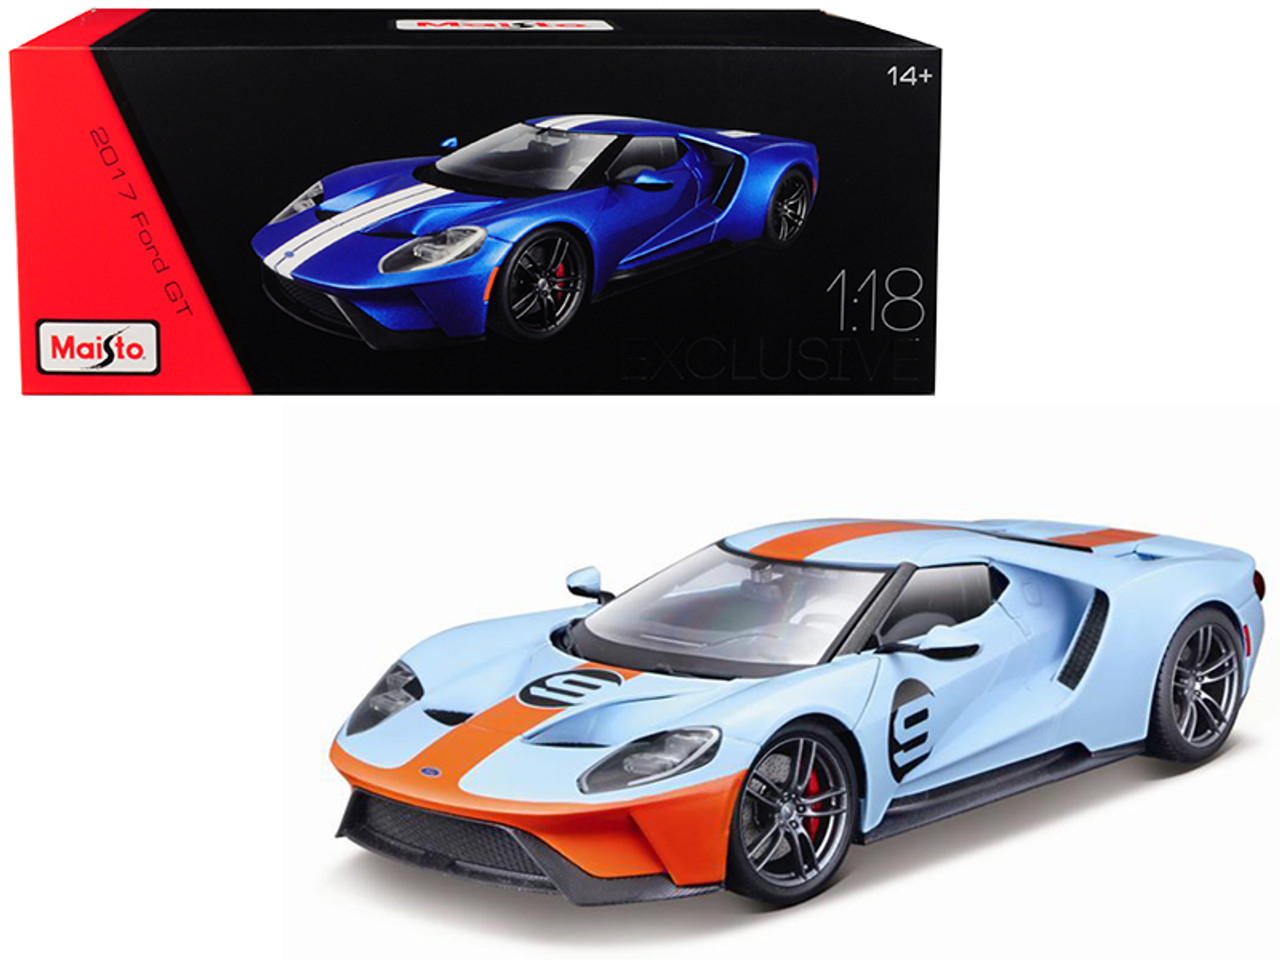 2017 Ford GT #9 Light Blue with Orange Stripe "Exclusive Edition" 1/18 Diecast Model Car by Maisto